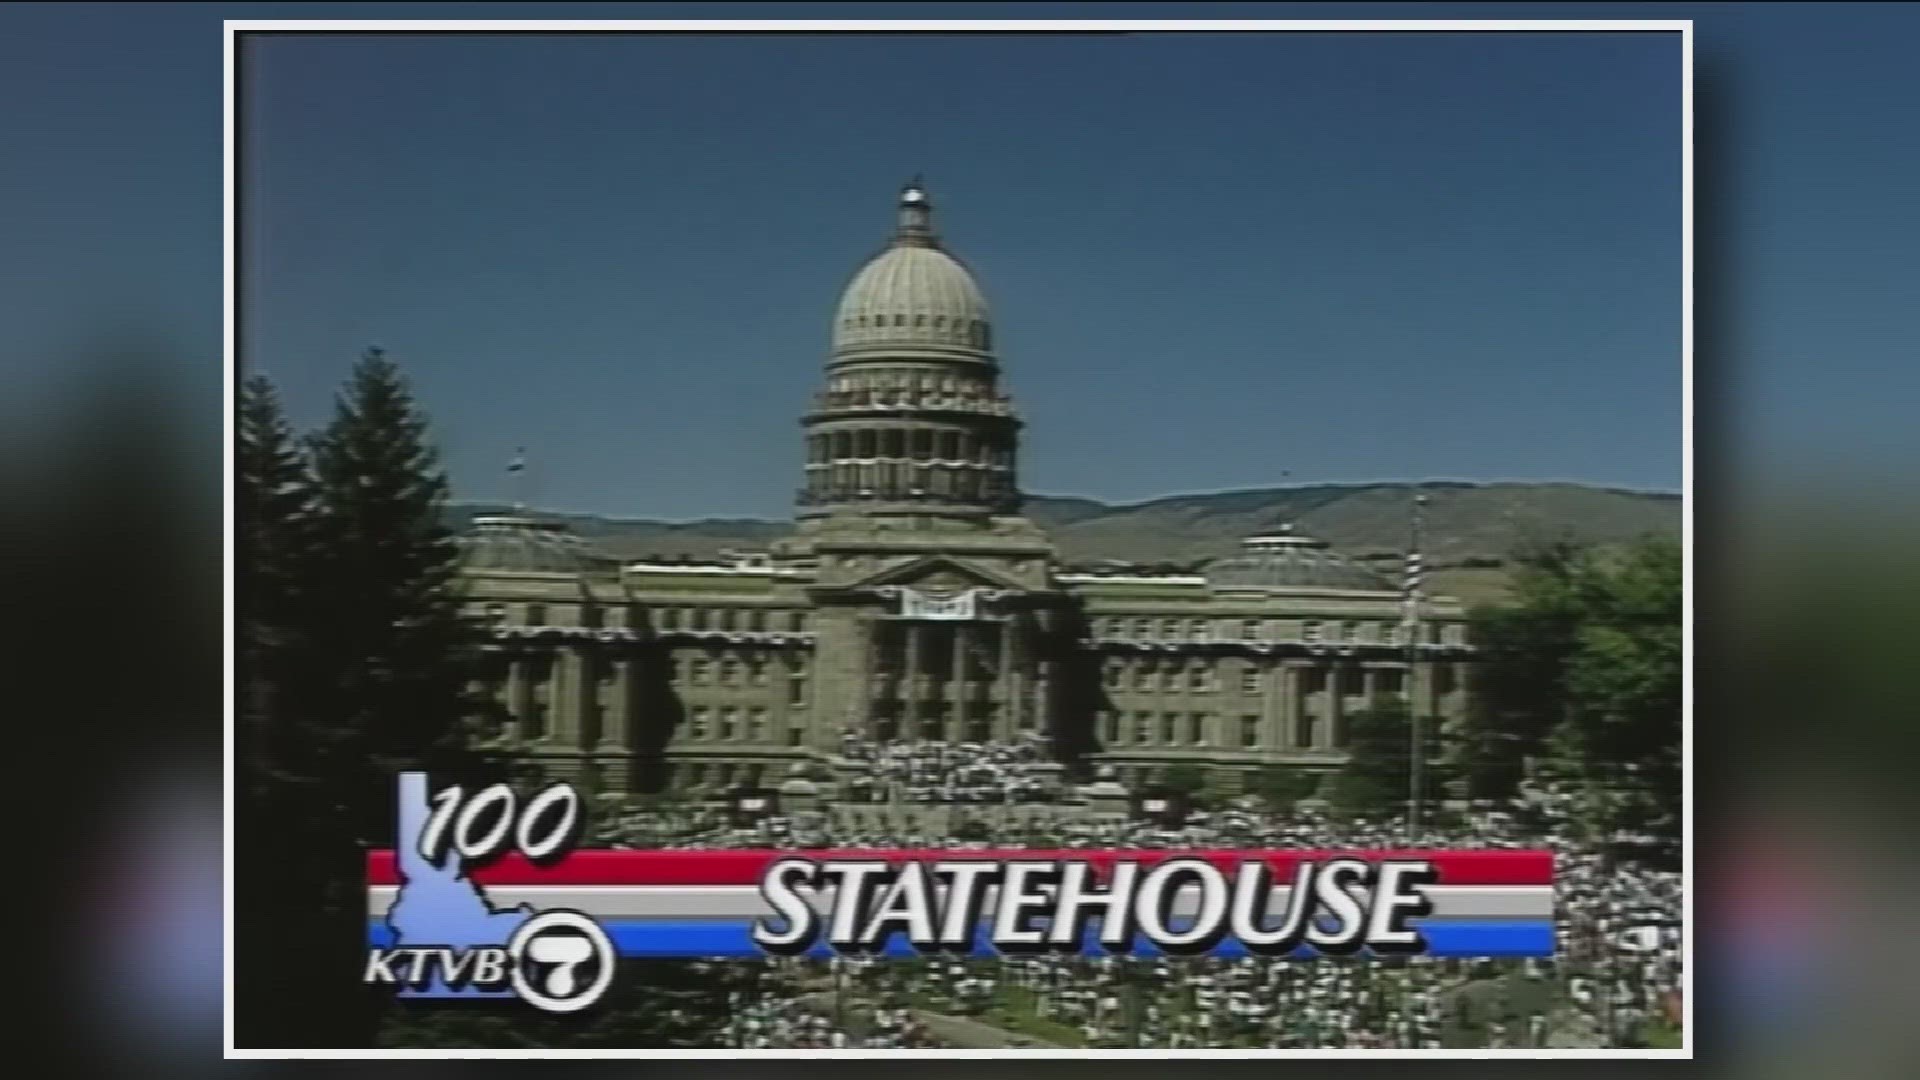 On July 3, 1990, Idaho celebrated its 100th birthday. Thousands came to celebrate while others were able to watch, thanks to 12 hours of coverage from KTVB.